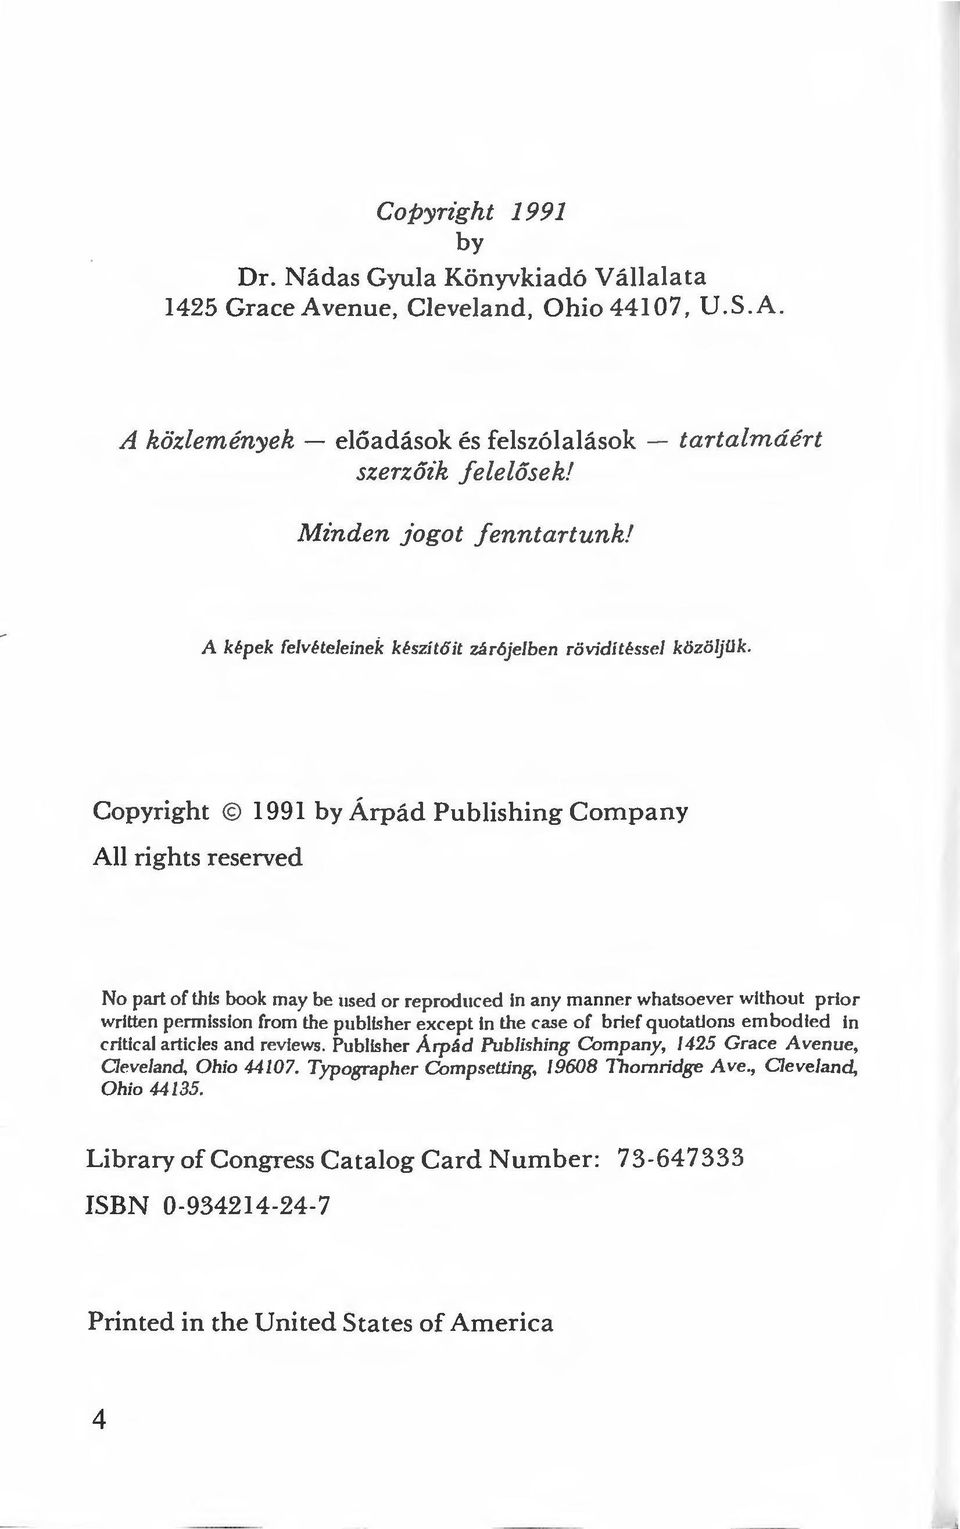 Copyright 1991 by Árpád Publishing Company Ali rights reserved No part of this book may be used or reproduced in any manner whatsoever wlthout prior wrltten permission from the publisher except ln